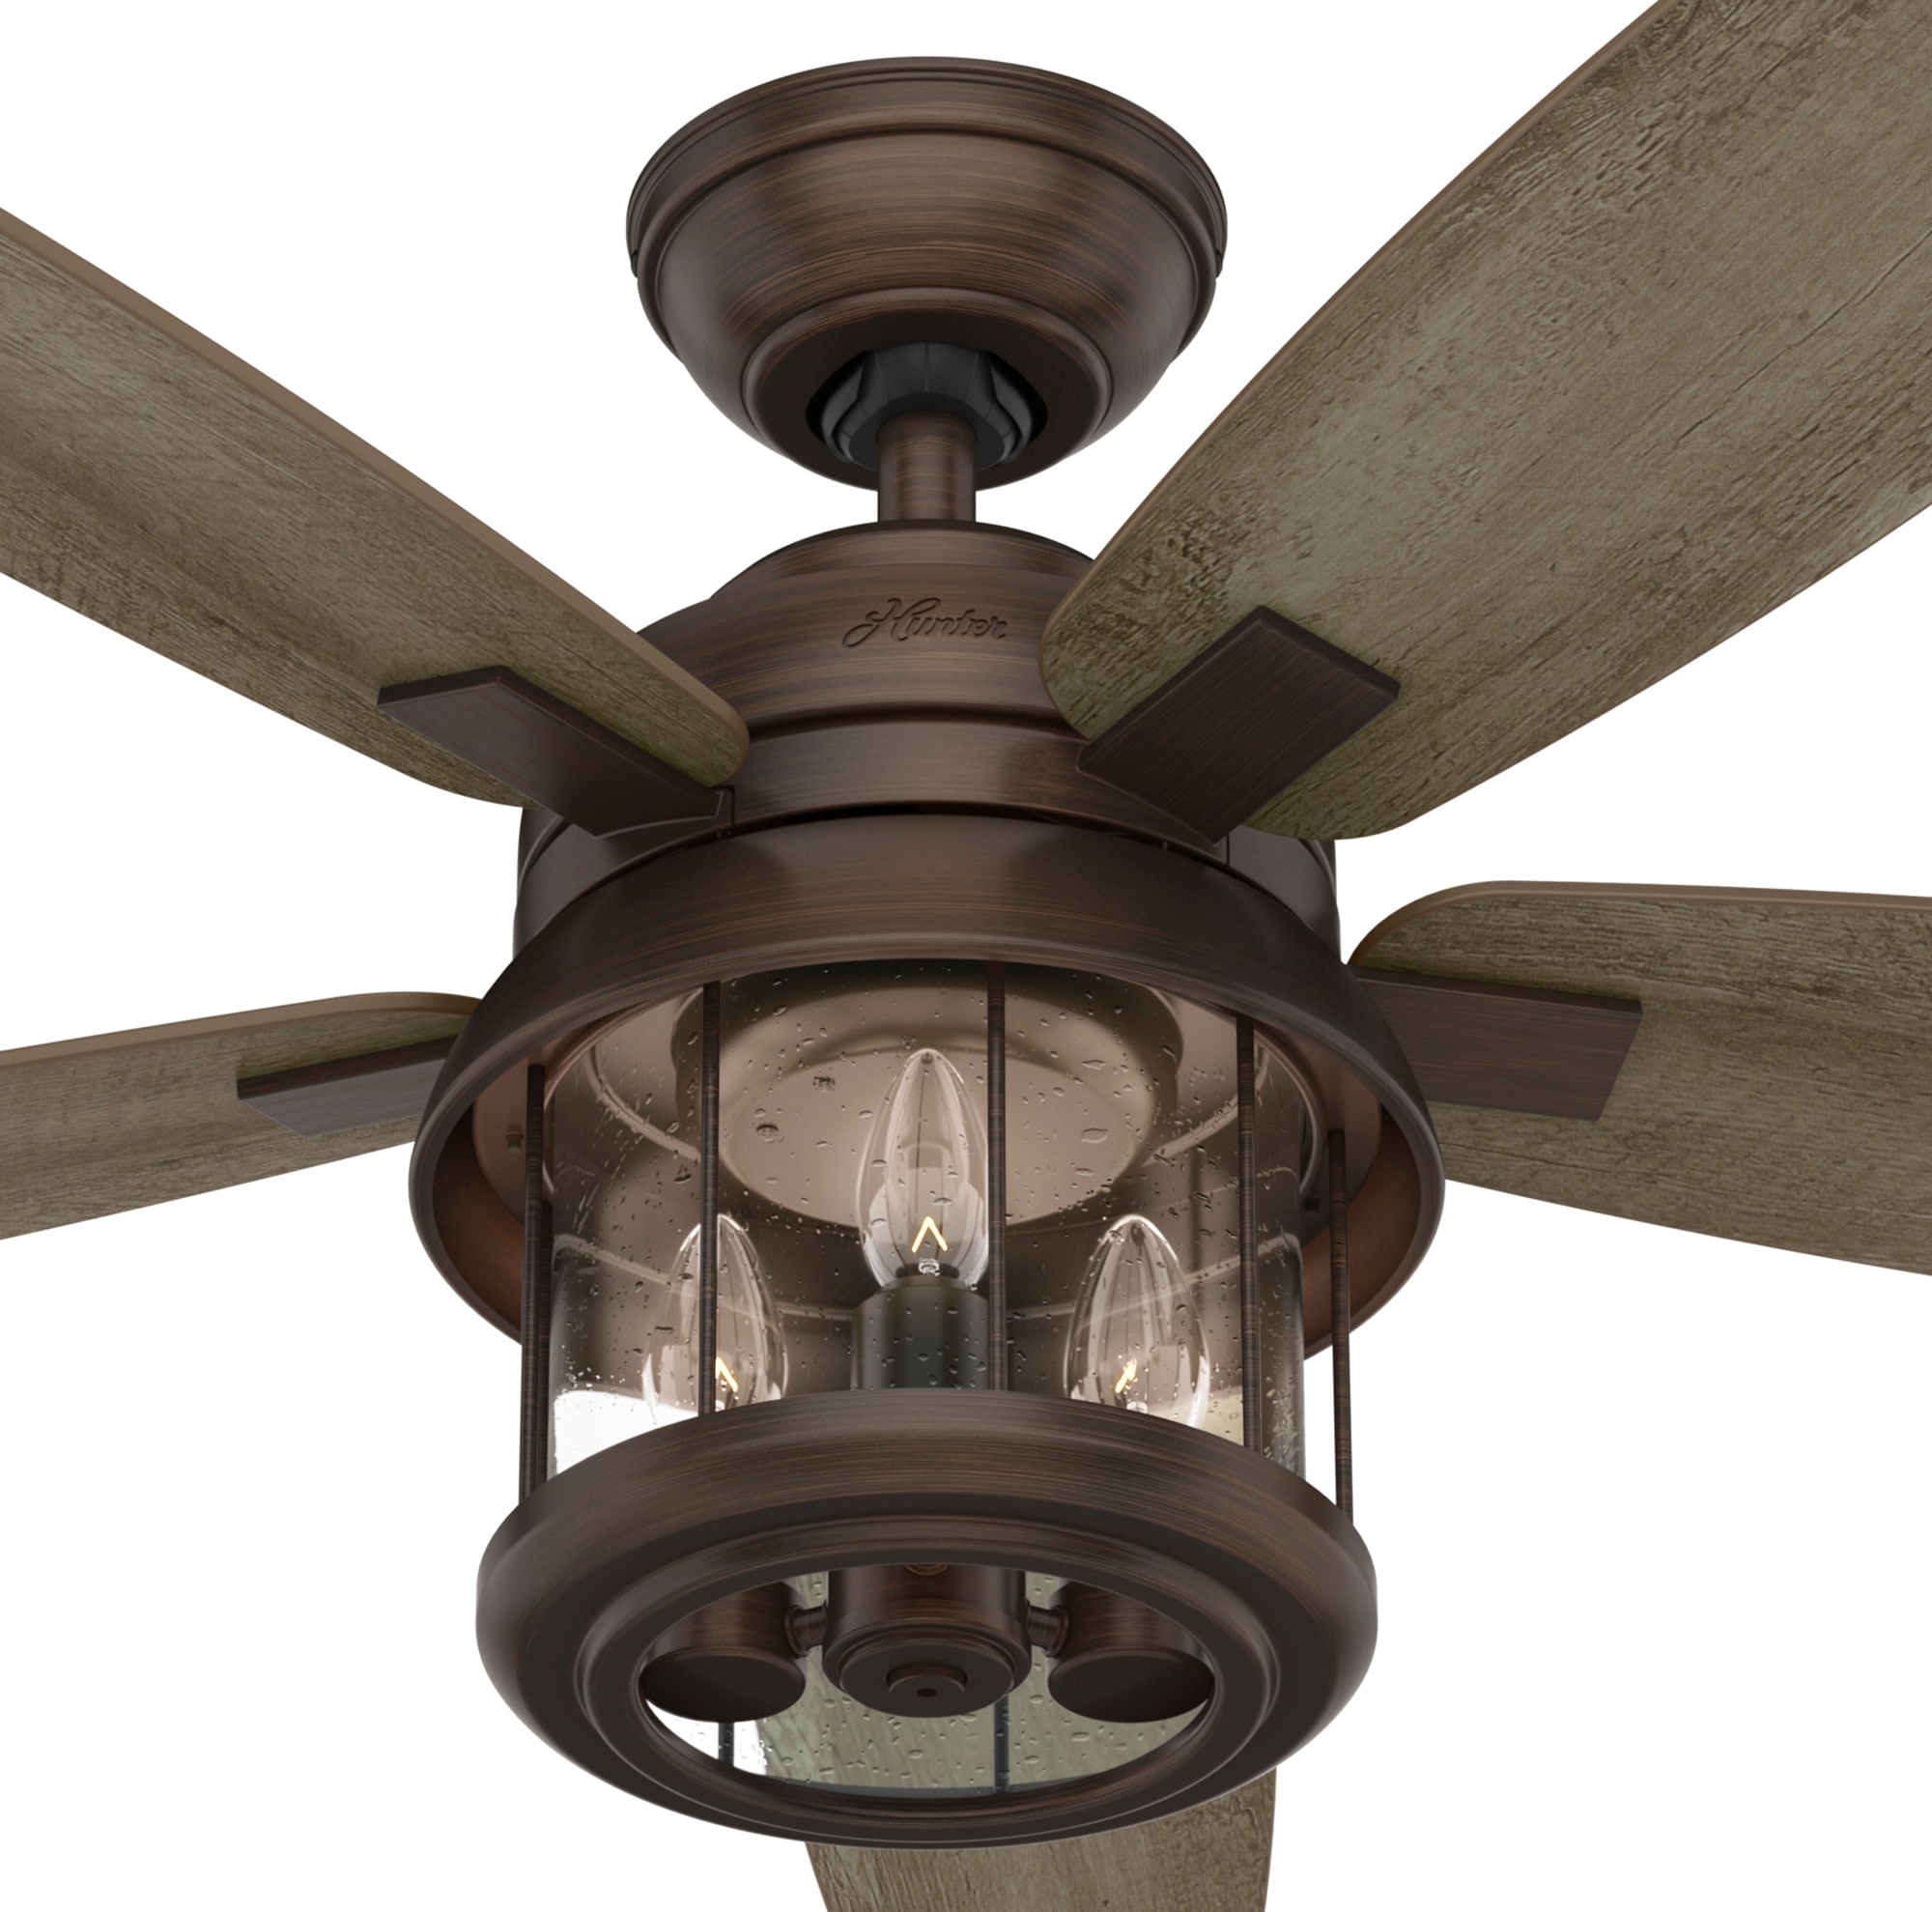 Hunter C Bay 52 In Weathered Copper Indoor Outdoor Ceiling Fan With Light And Remote 5 Blade The Fans Department At Lowes Com